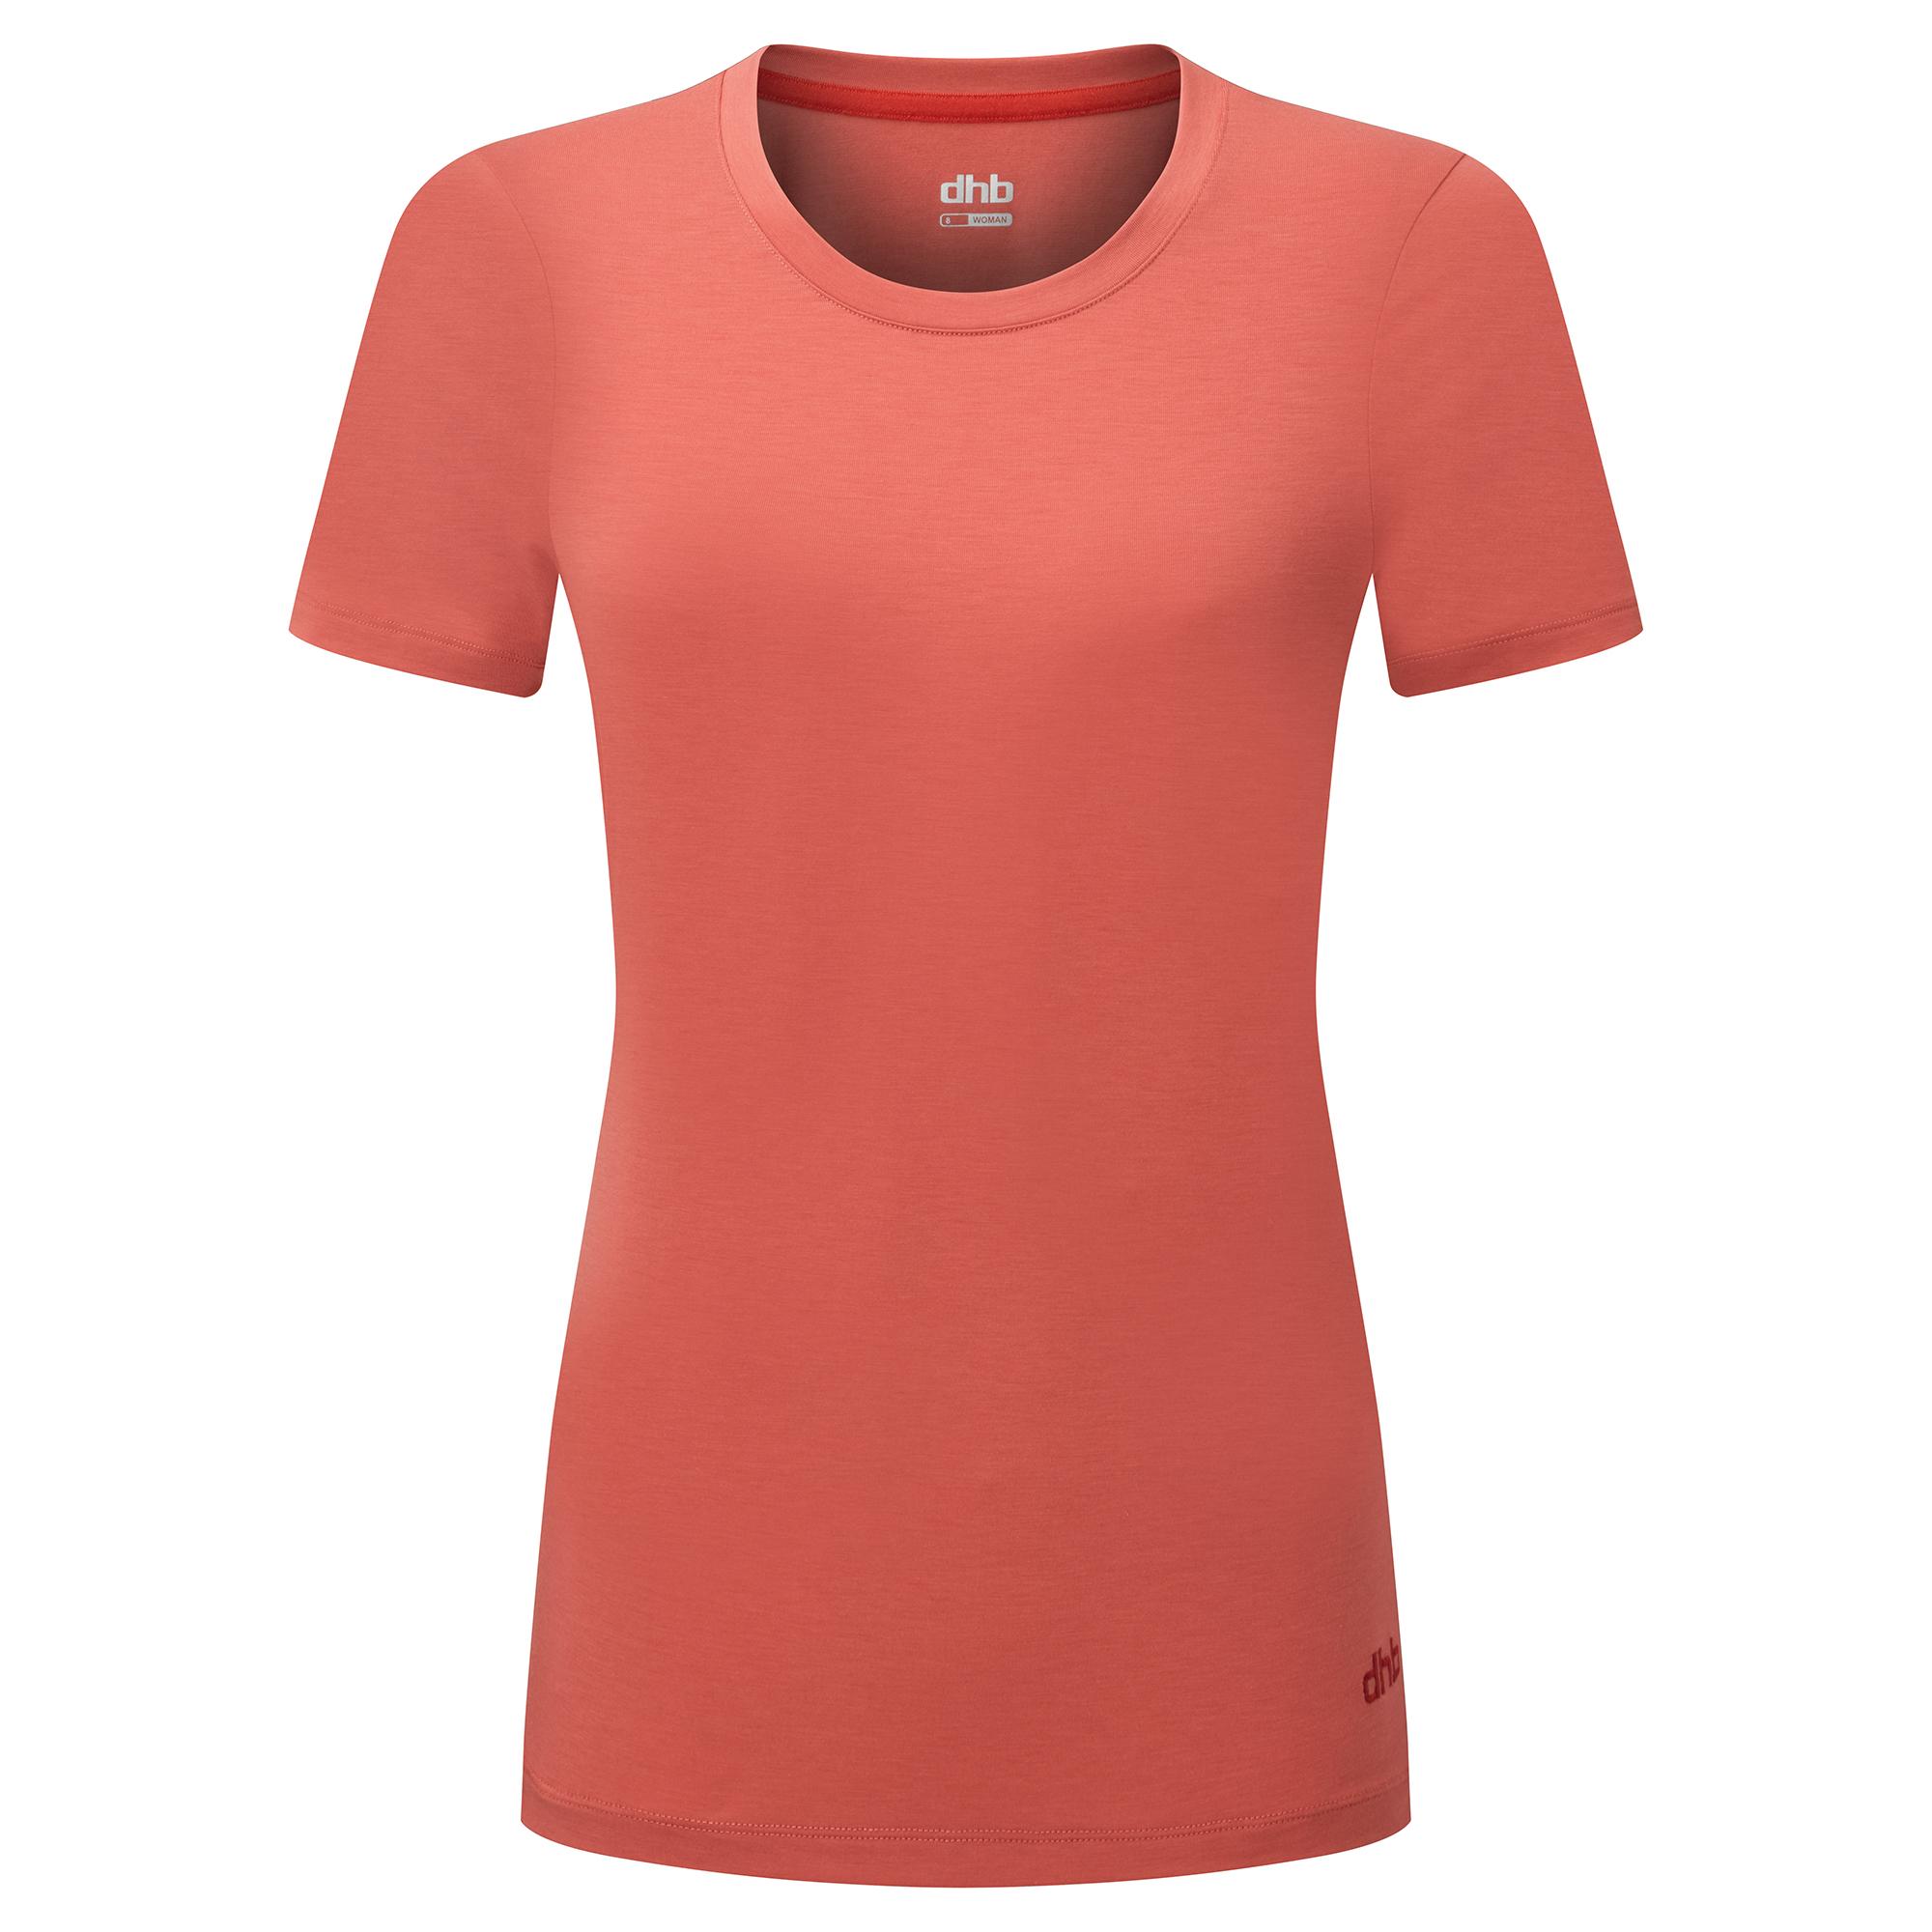 Dhb Trail Womens Short Sleeve Jersey - Drirelease - Red